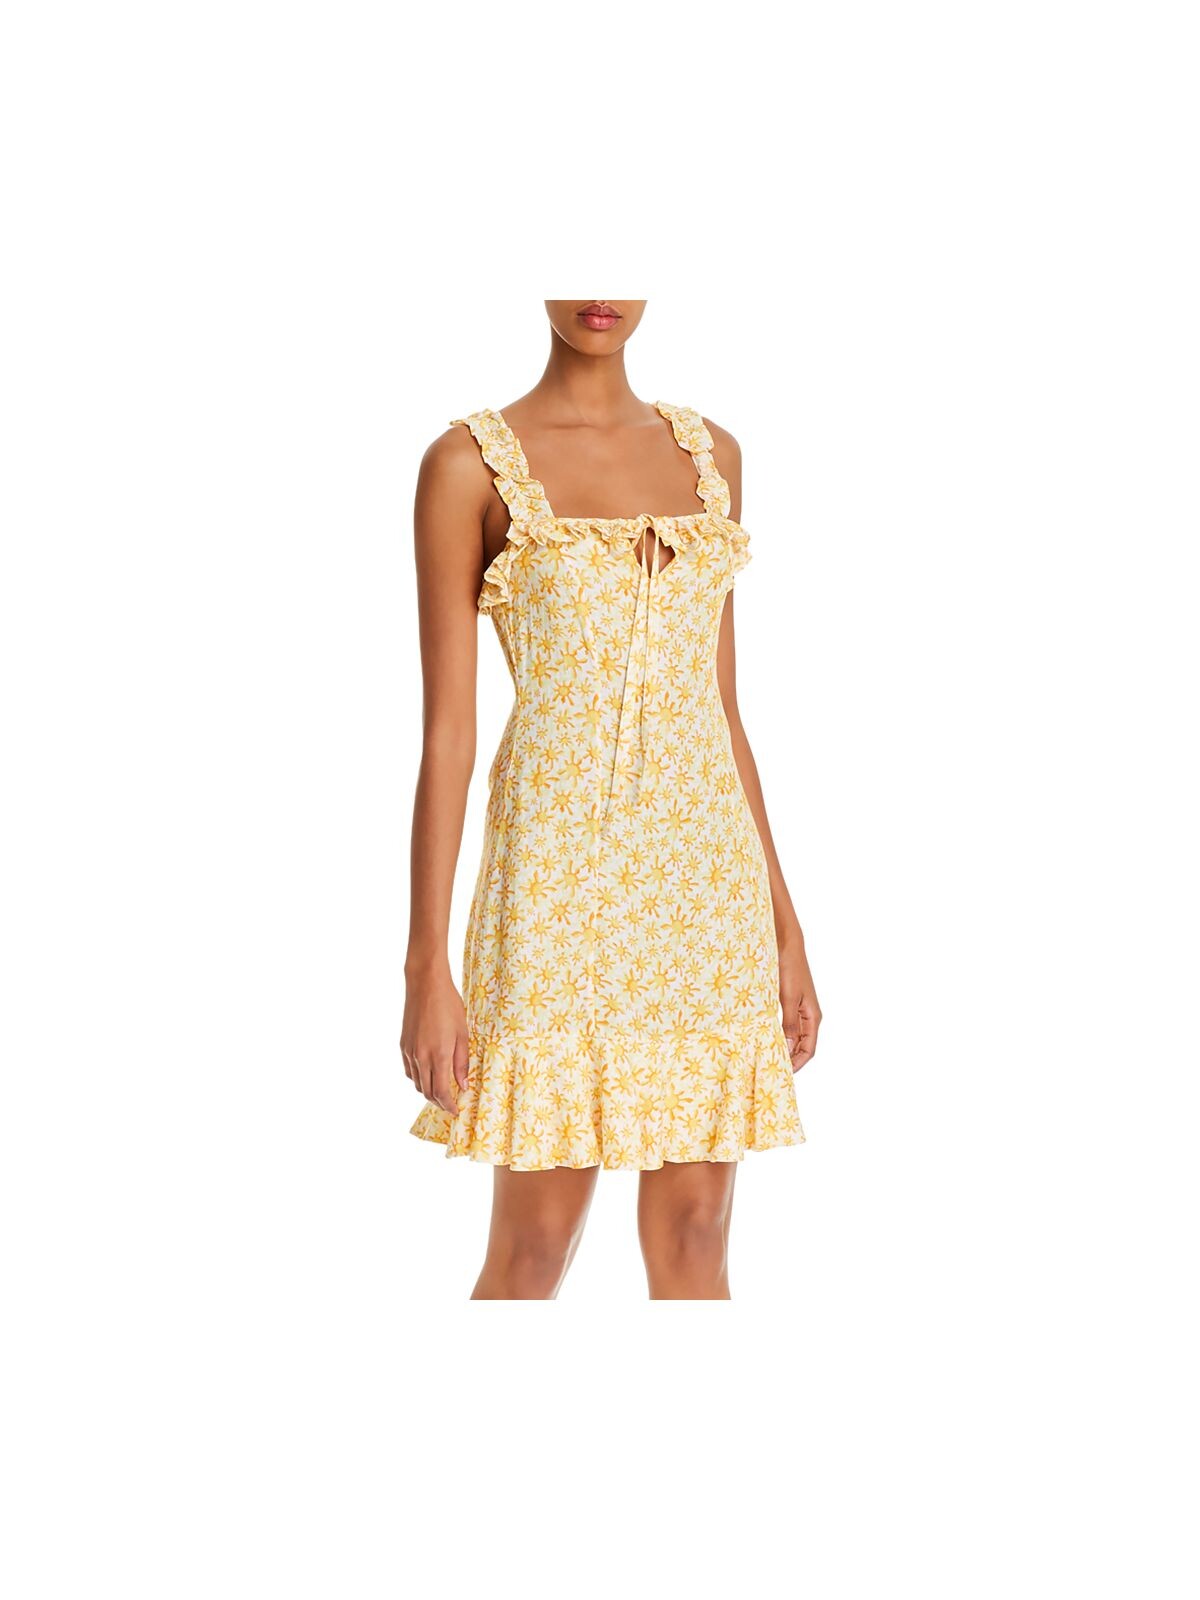 ALL THINGS MOCHI Womens Yellow Ruffled Tie Sleeveless Square Neck Above The Knee Shift Dress XL